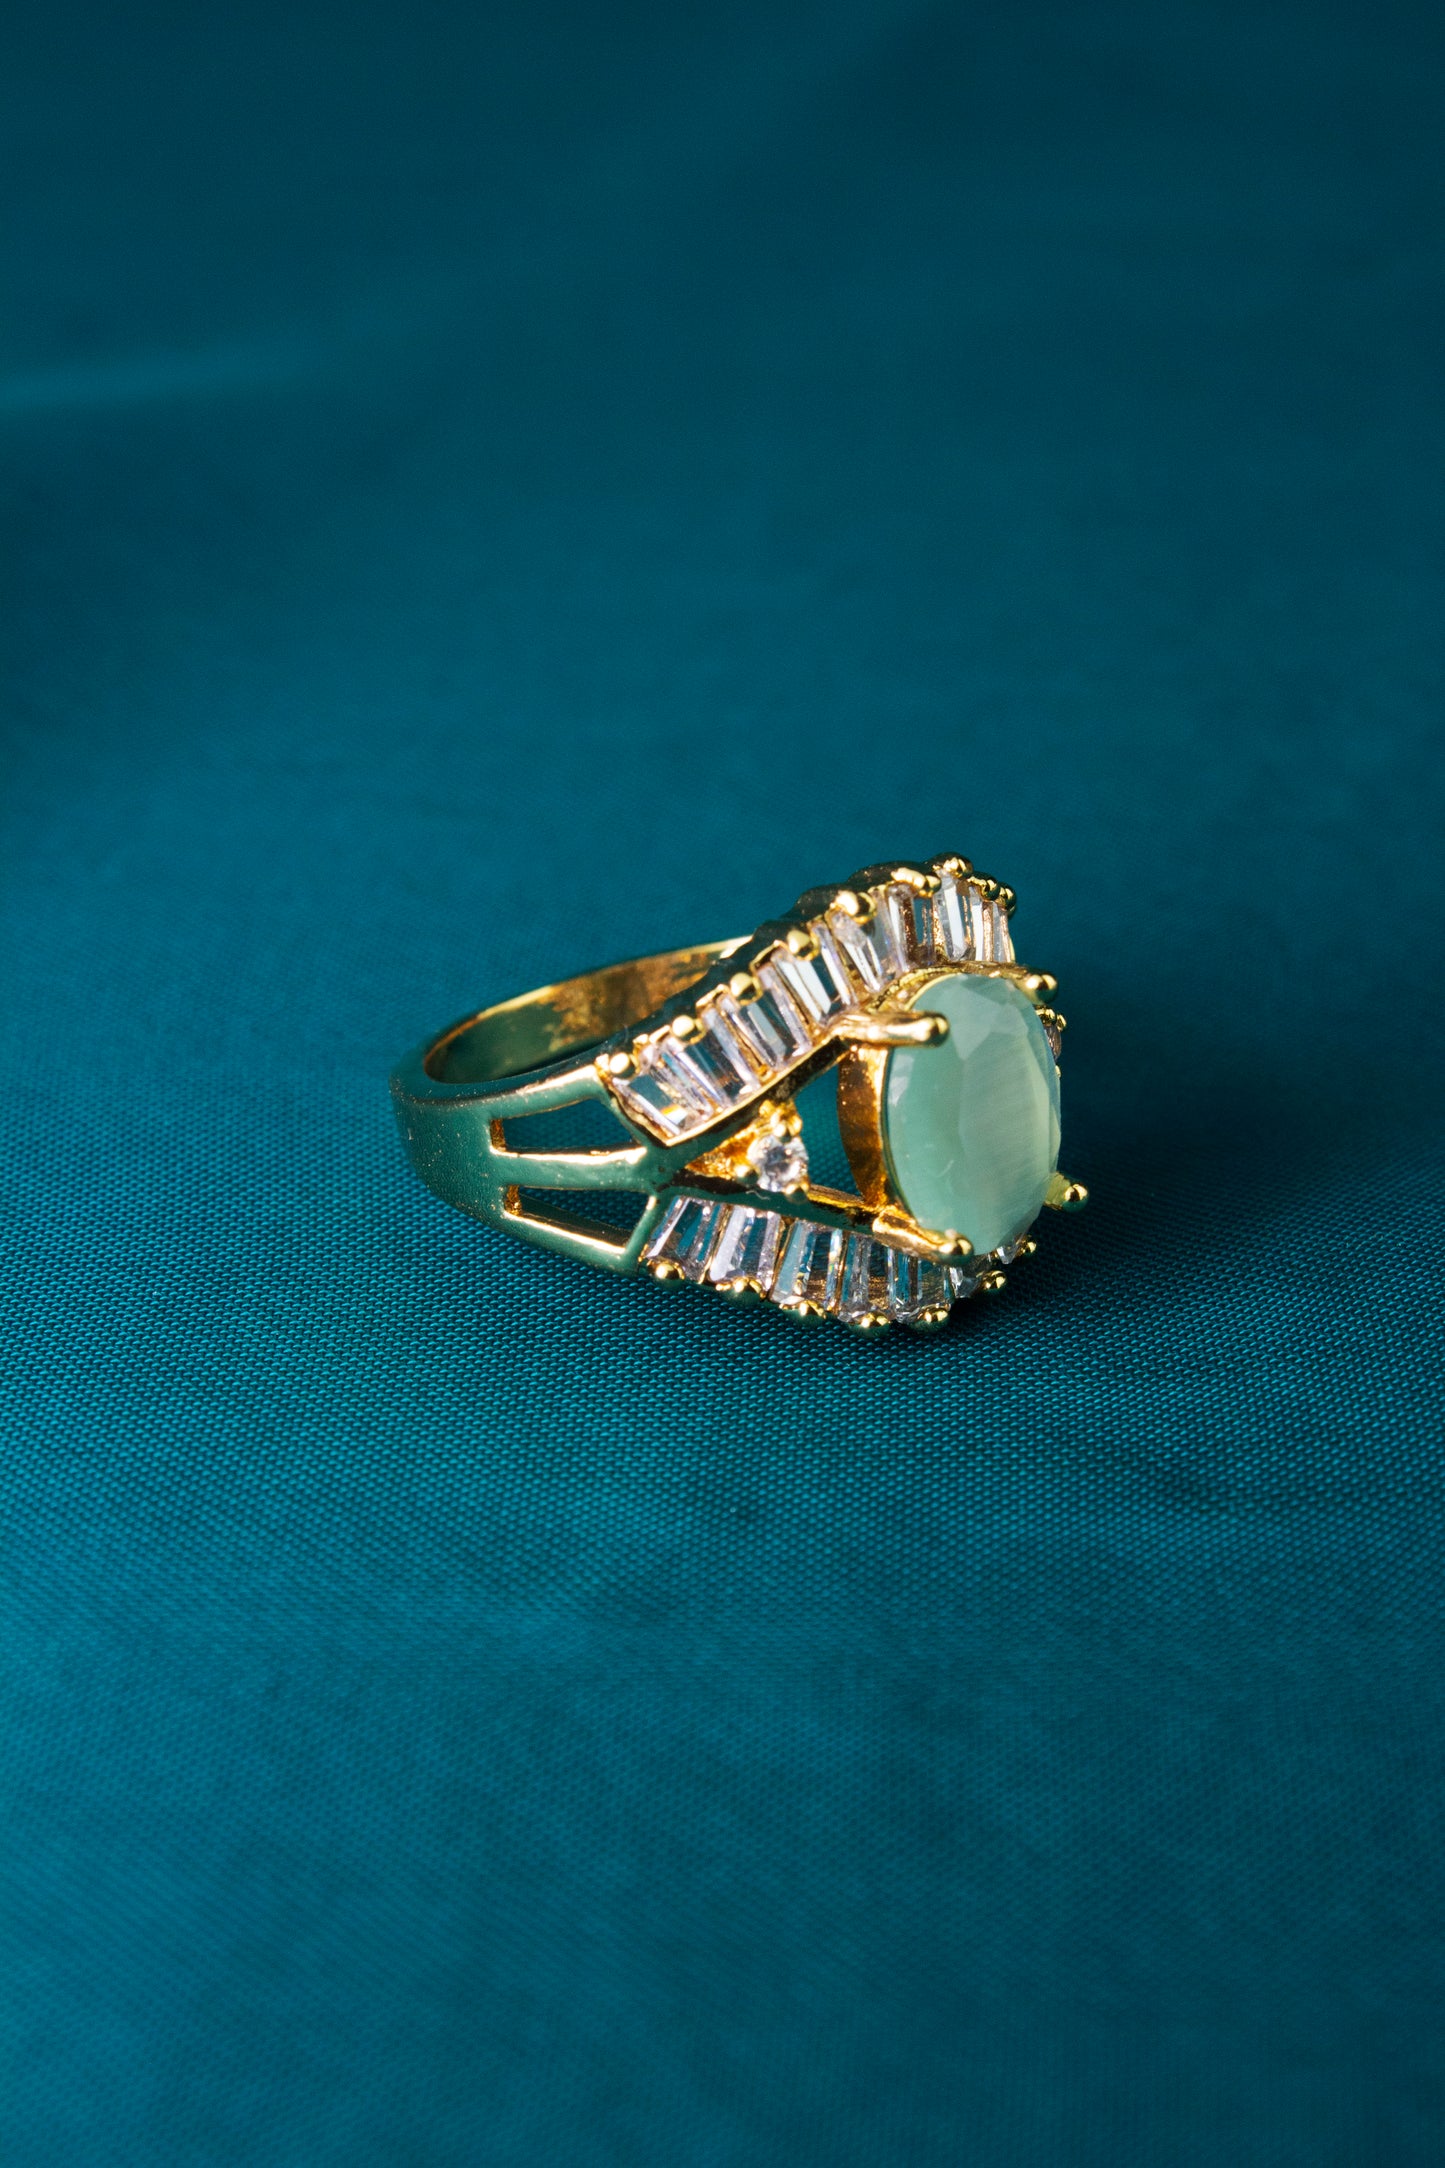 Special Edition Ring - Zinc Diamond - One Carat Gold Plated